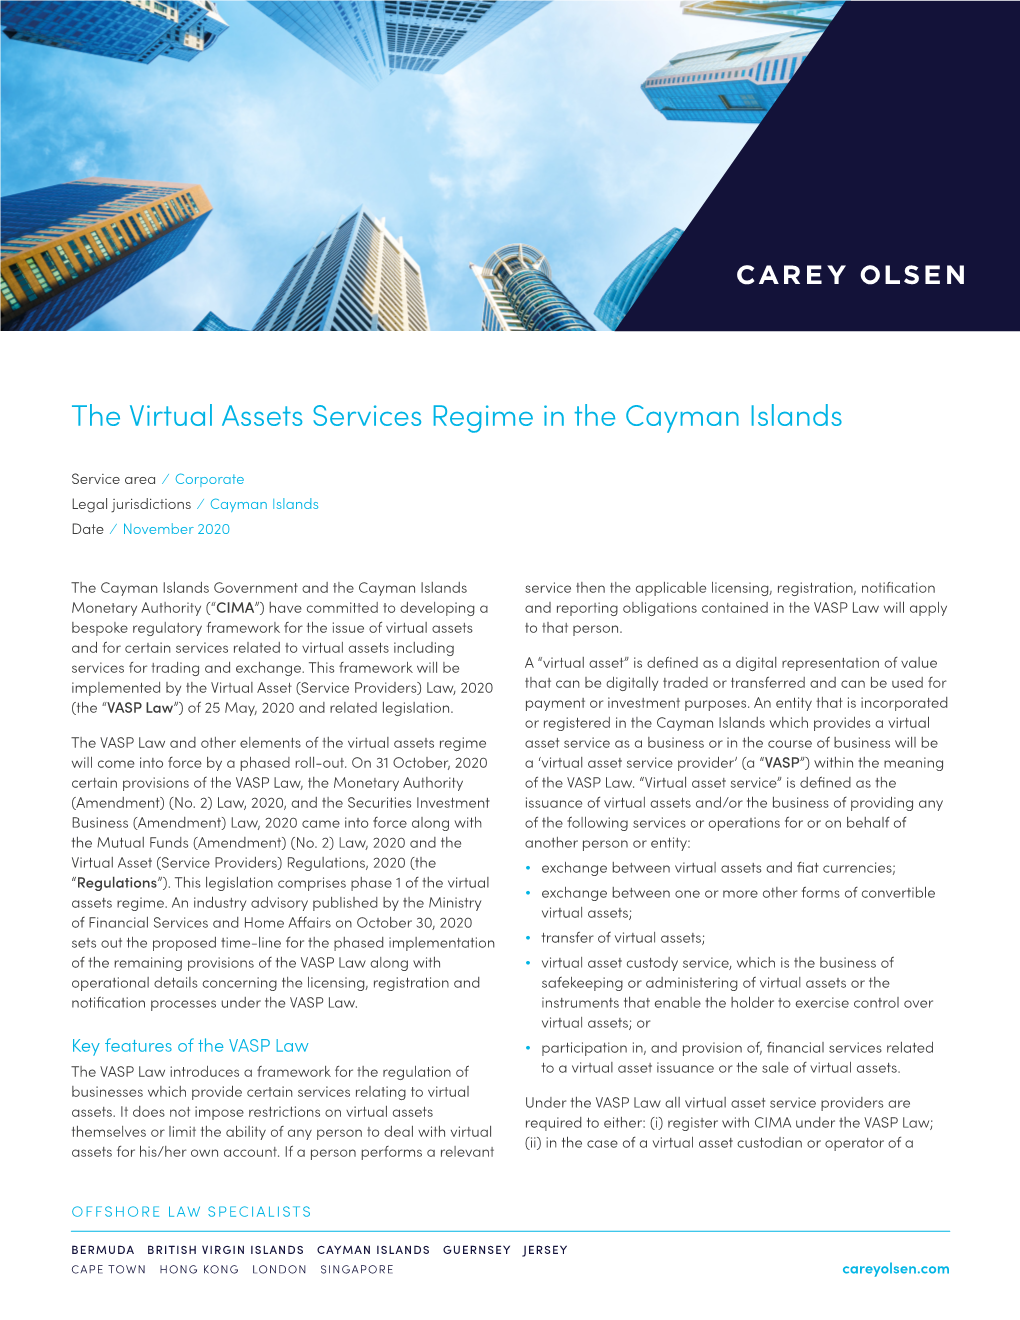 The Virtual Assets Services Regime in the Cayman Islands